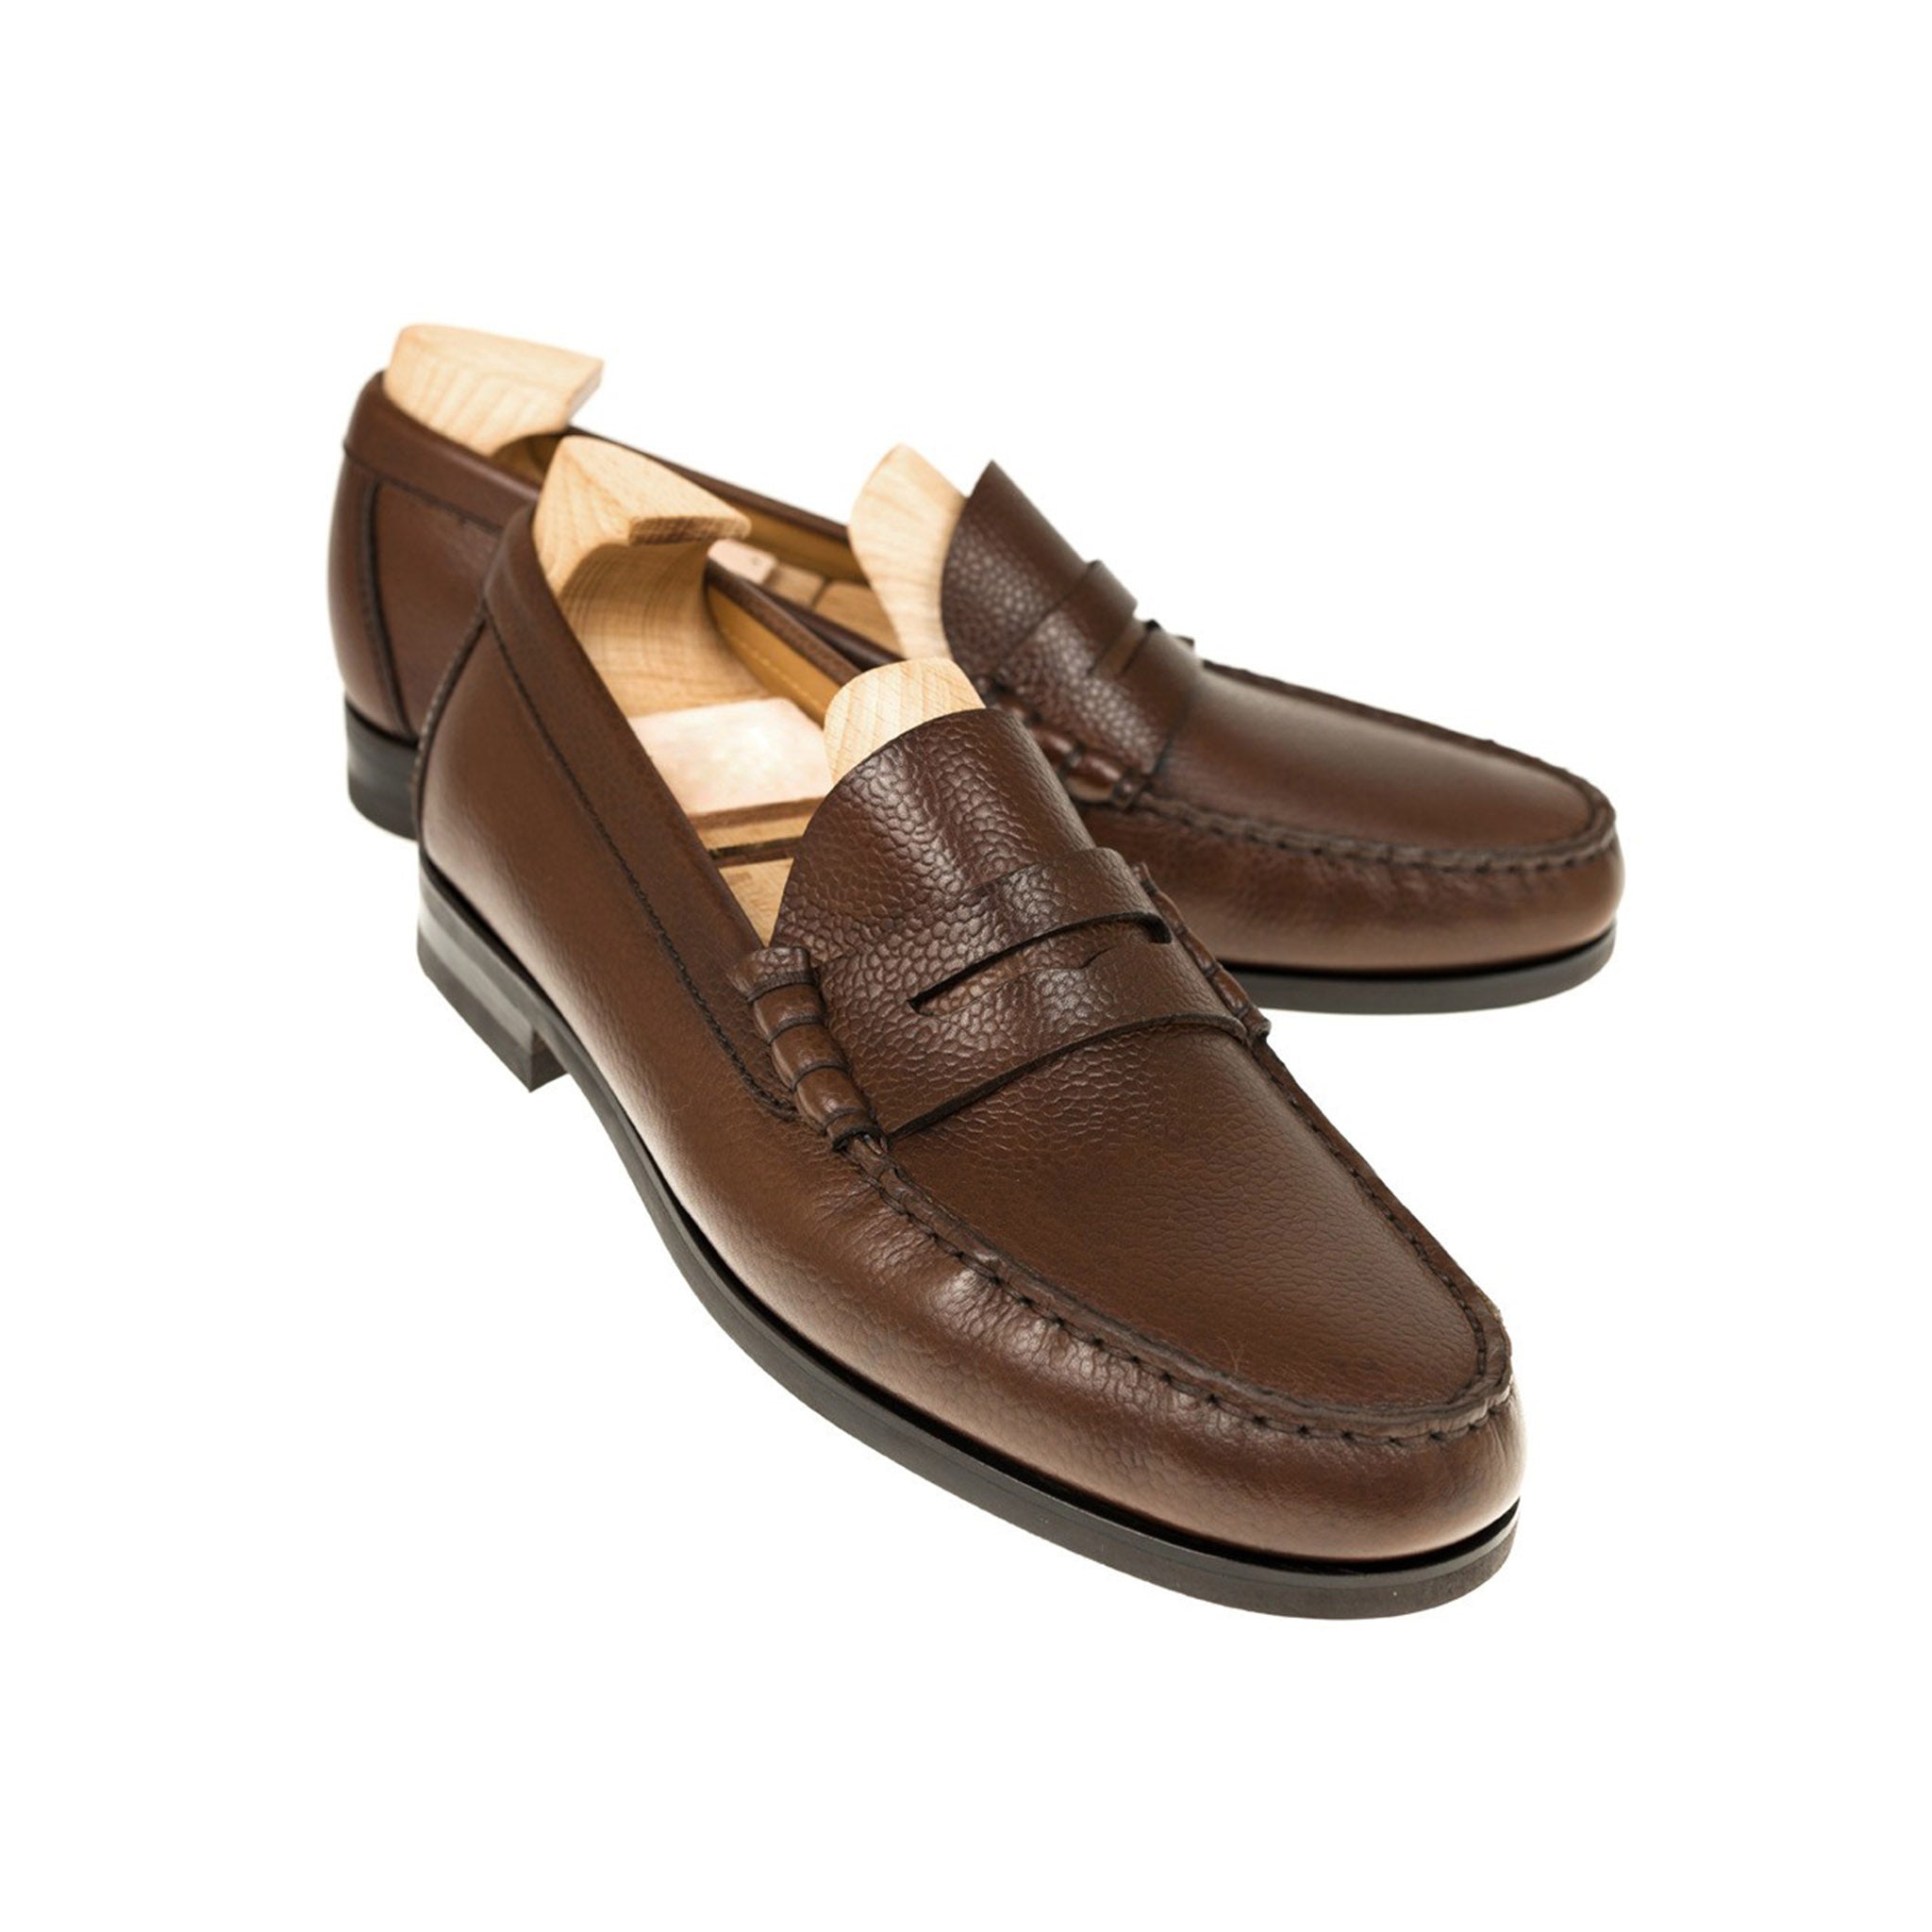 Saddle Men's Penny Loafers